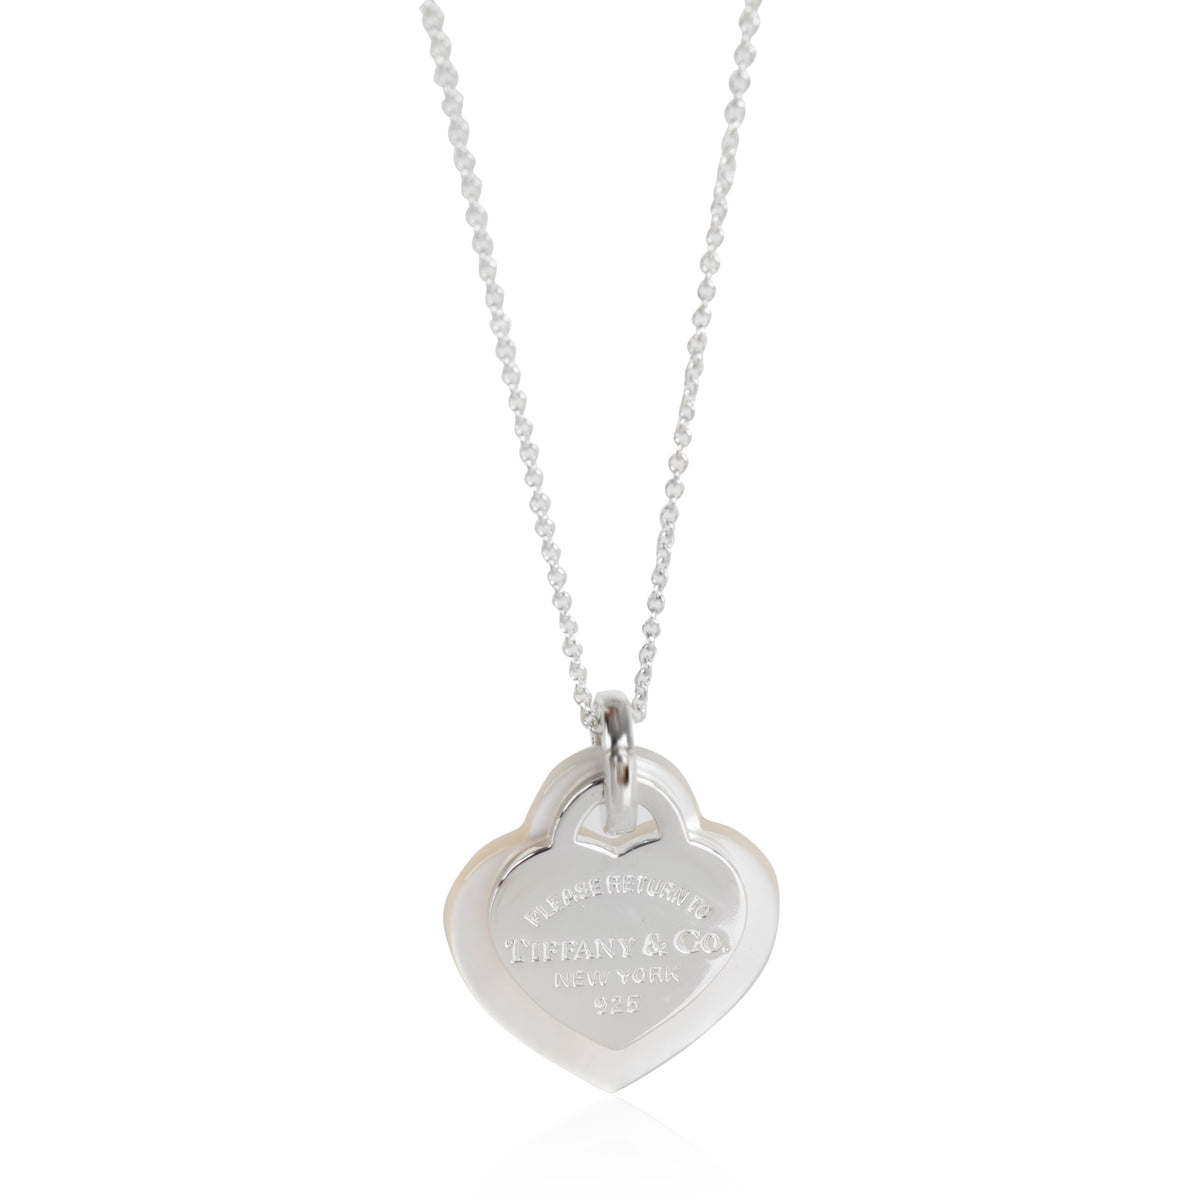 Tiffany & Co. Return to Tiffany Double Heart Necklace in  Sterling Silver